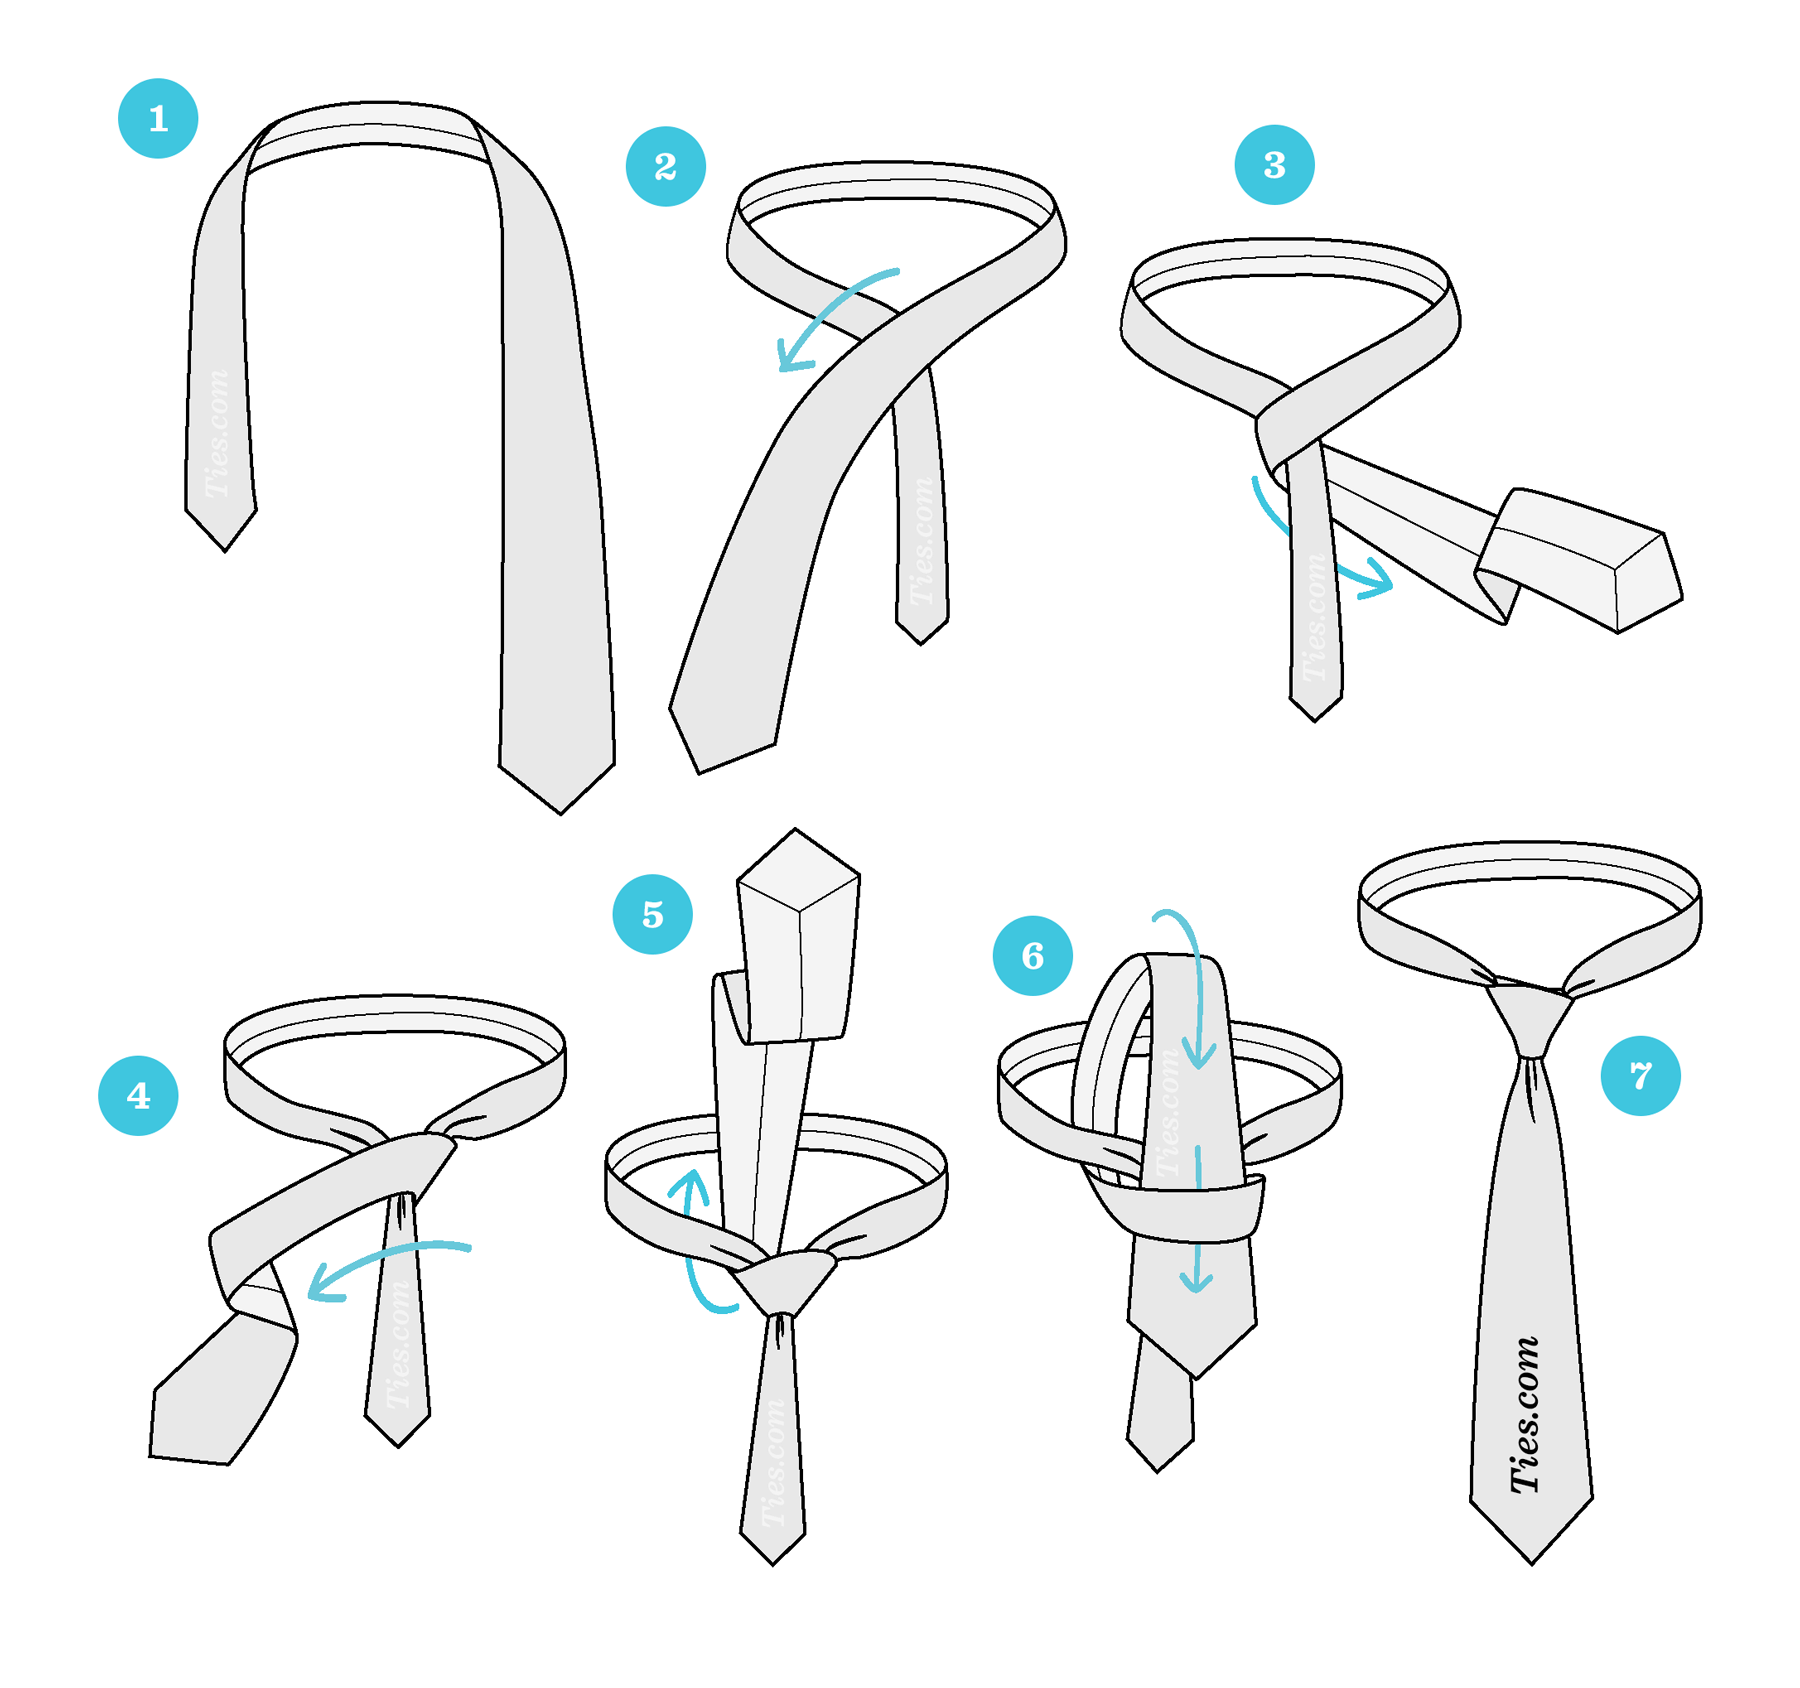 How to tie a tie - Quick and Easy 